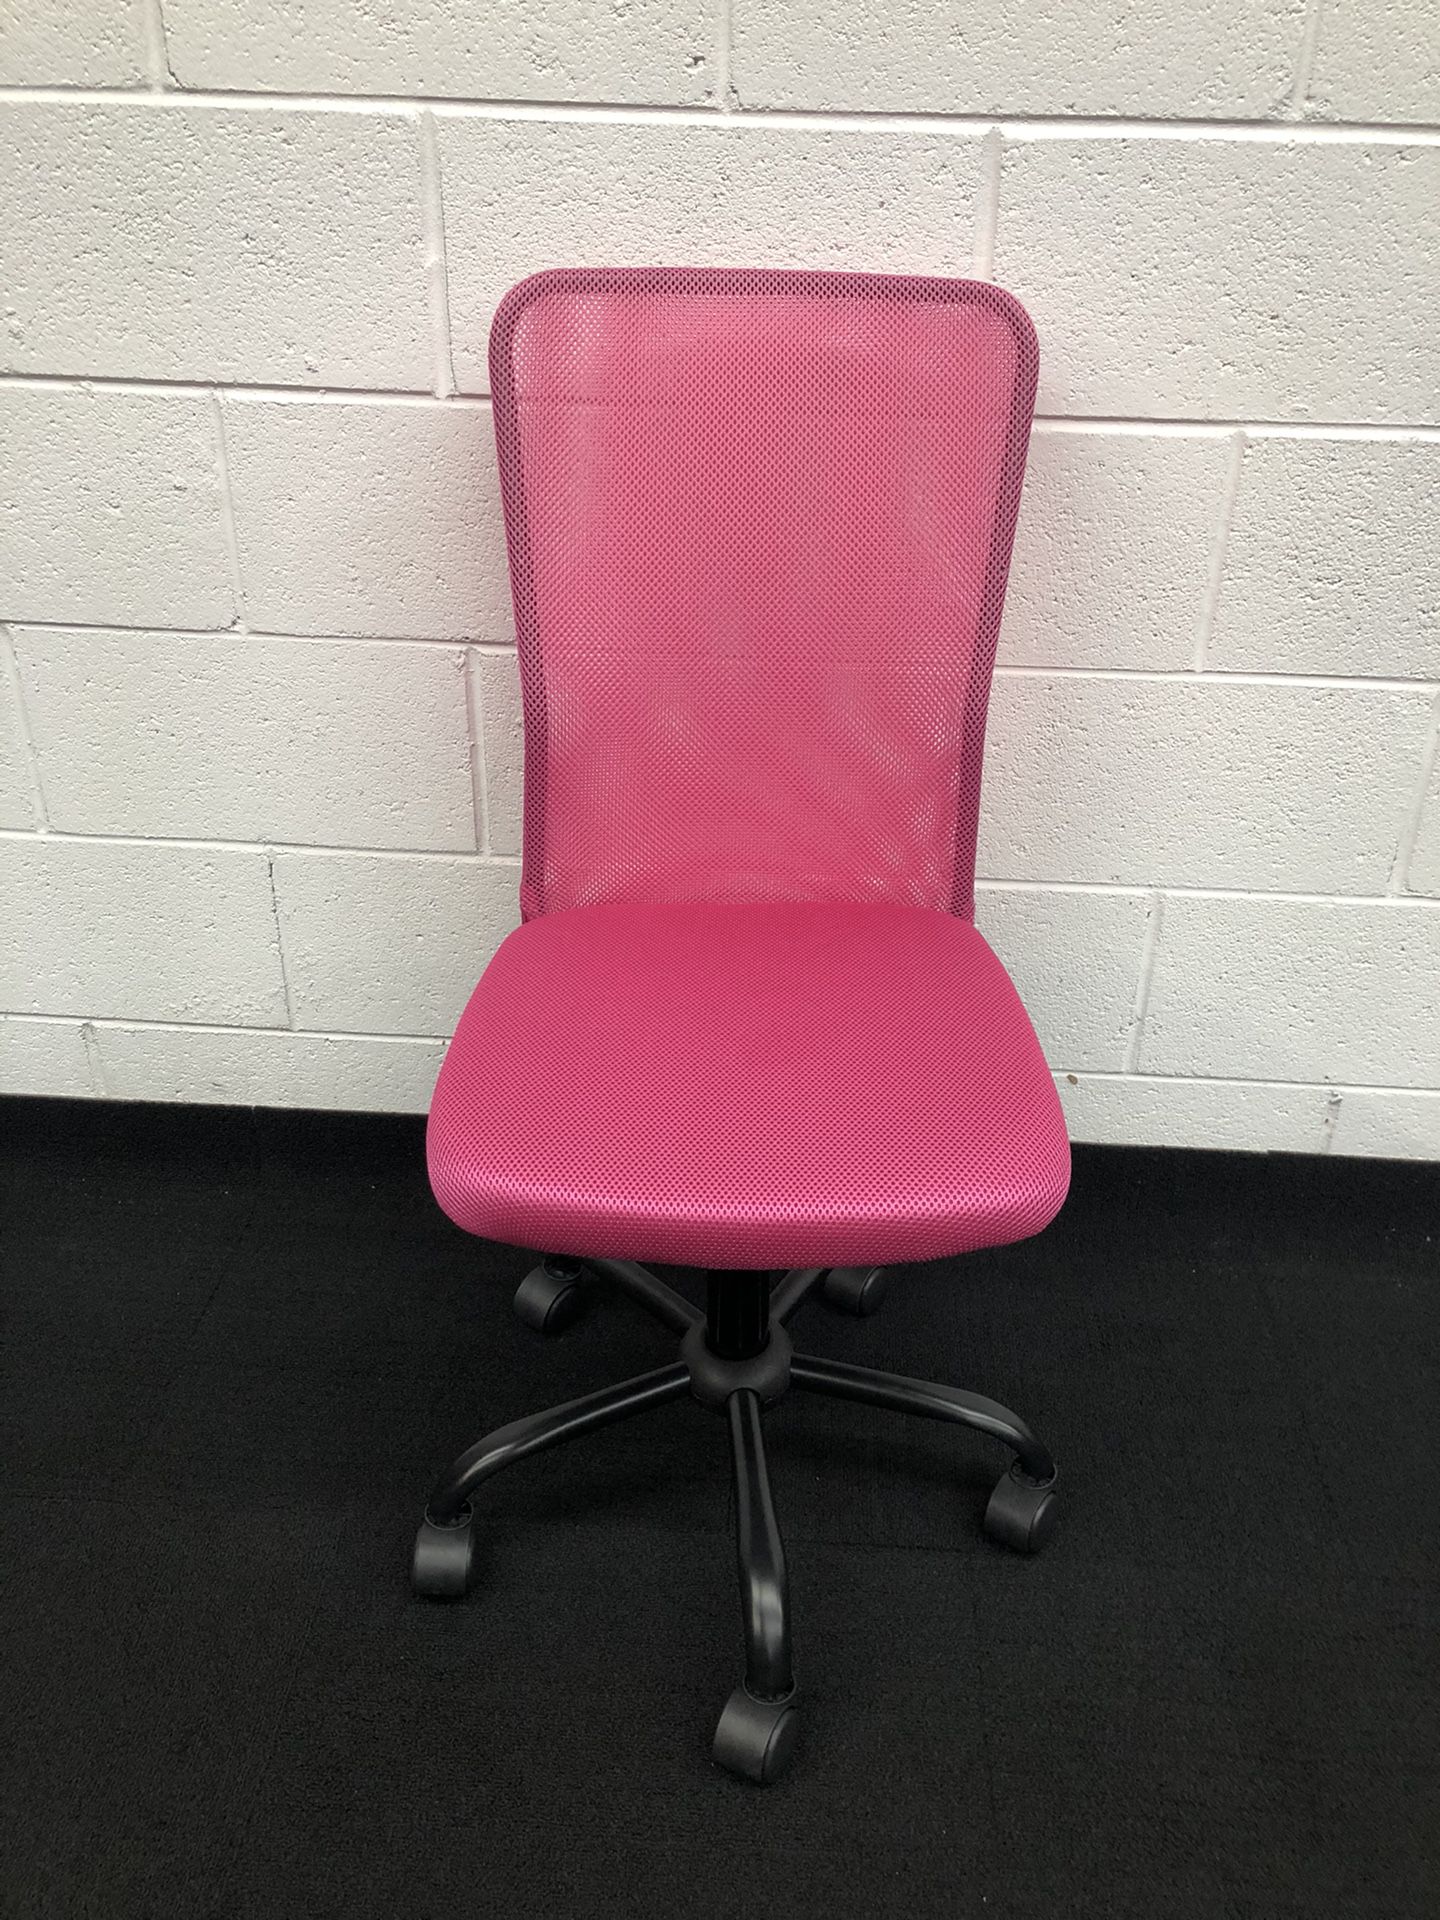 BRAND NEW PINK ADJUSTABLE MESH OFFICE CHAIR